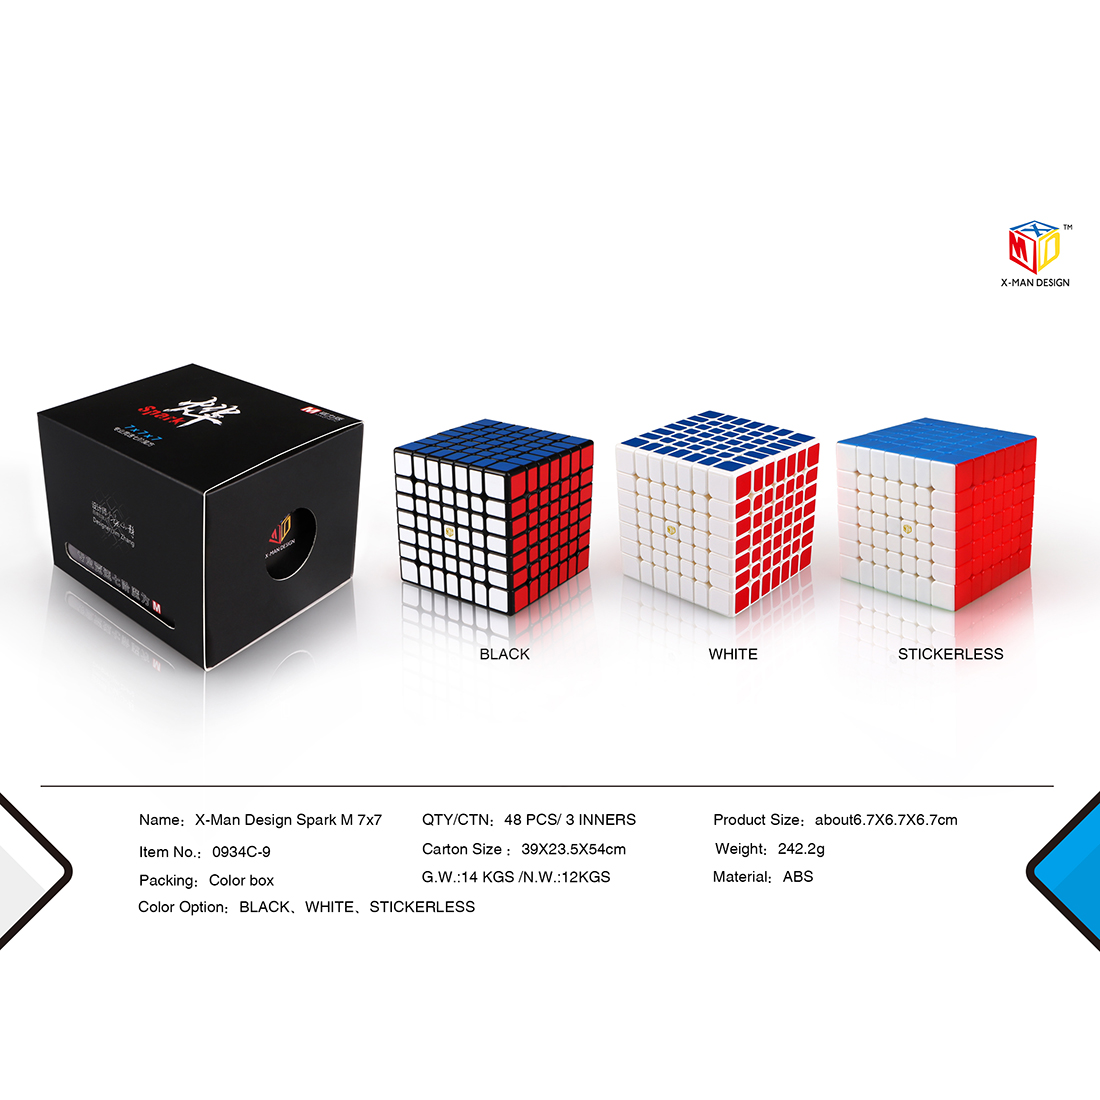 Details about   US SHIP QIYI Spark 7x7x7 Magnetic Speed Competition Magic Cube Puzzle Cube Toy